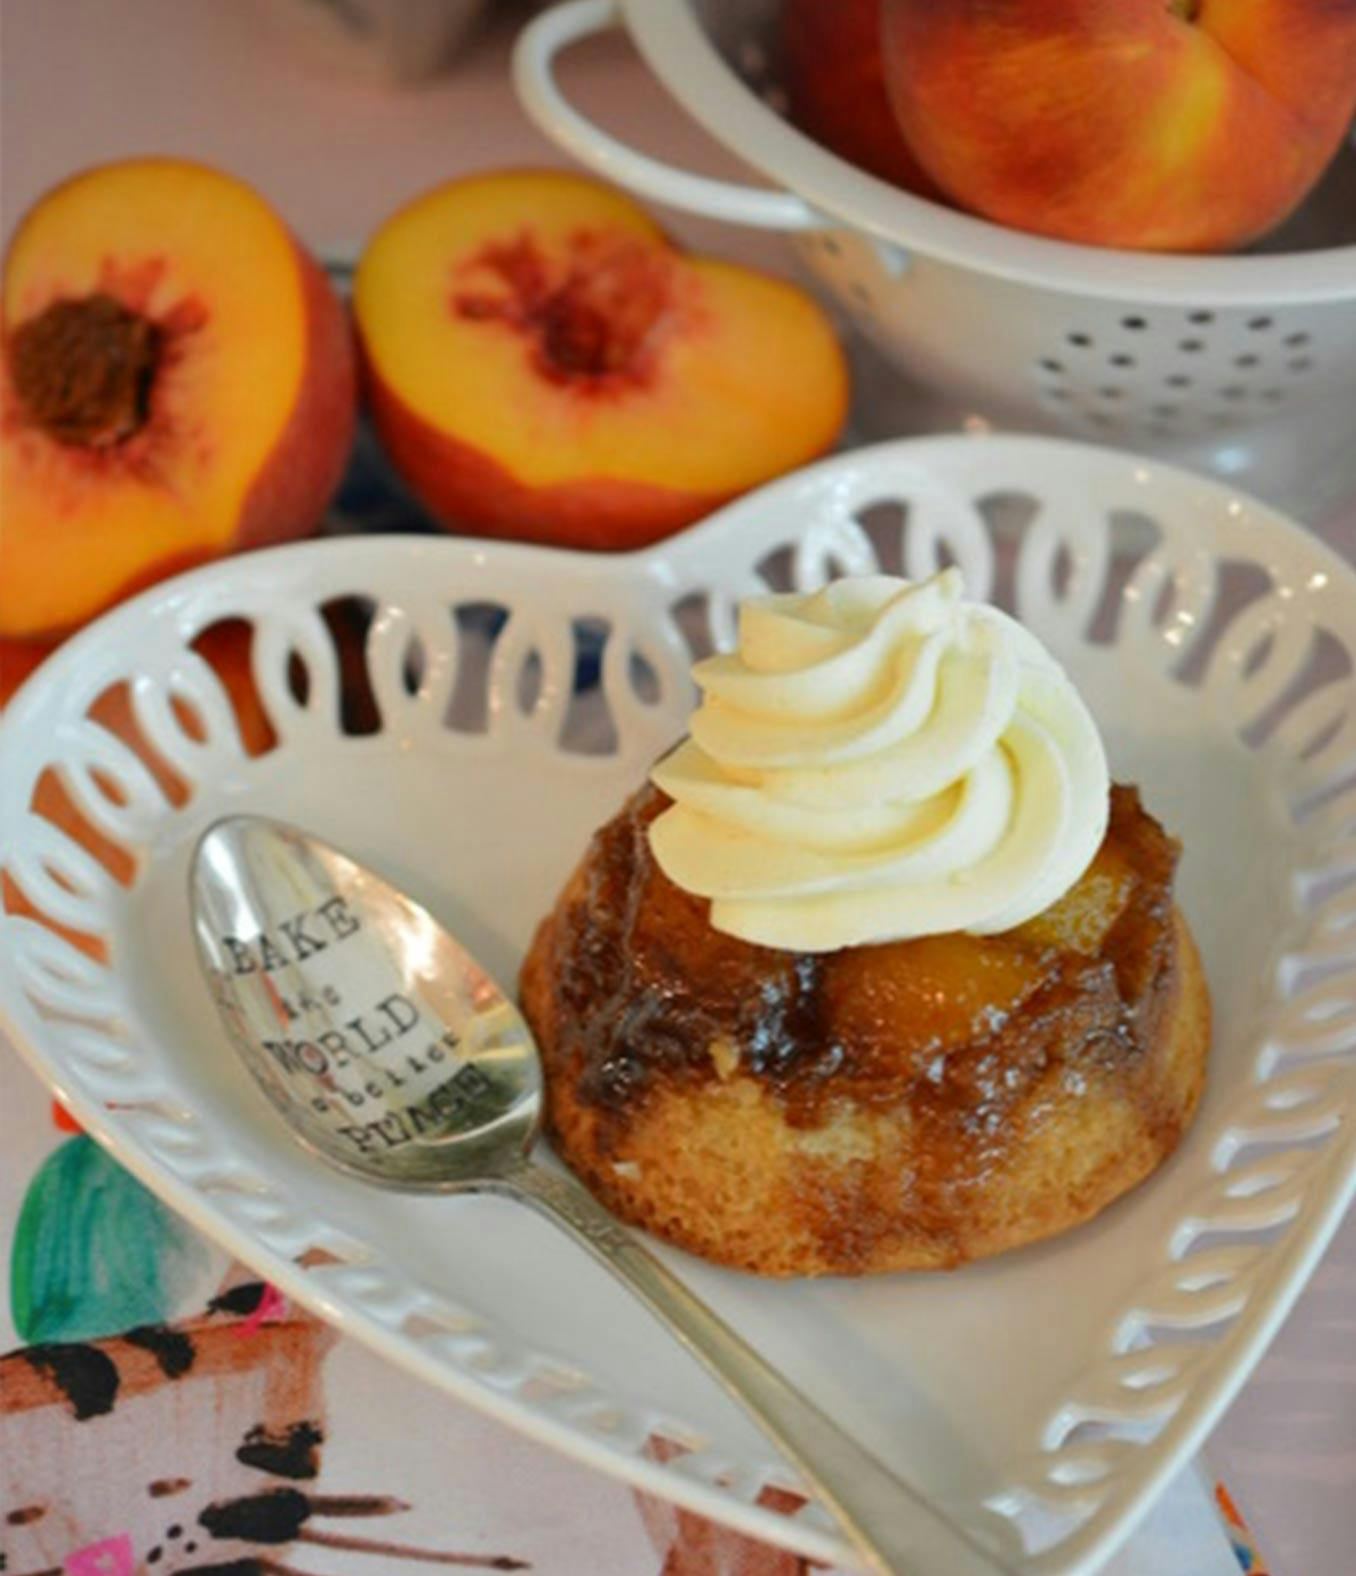 Peach Upside Down Cakes with Cinnamon Whipped Cream